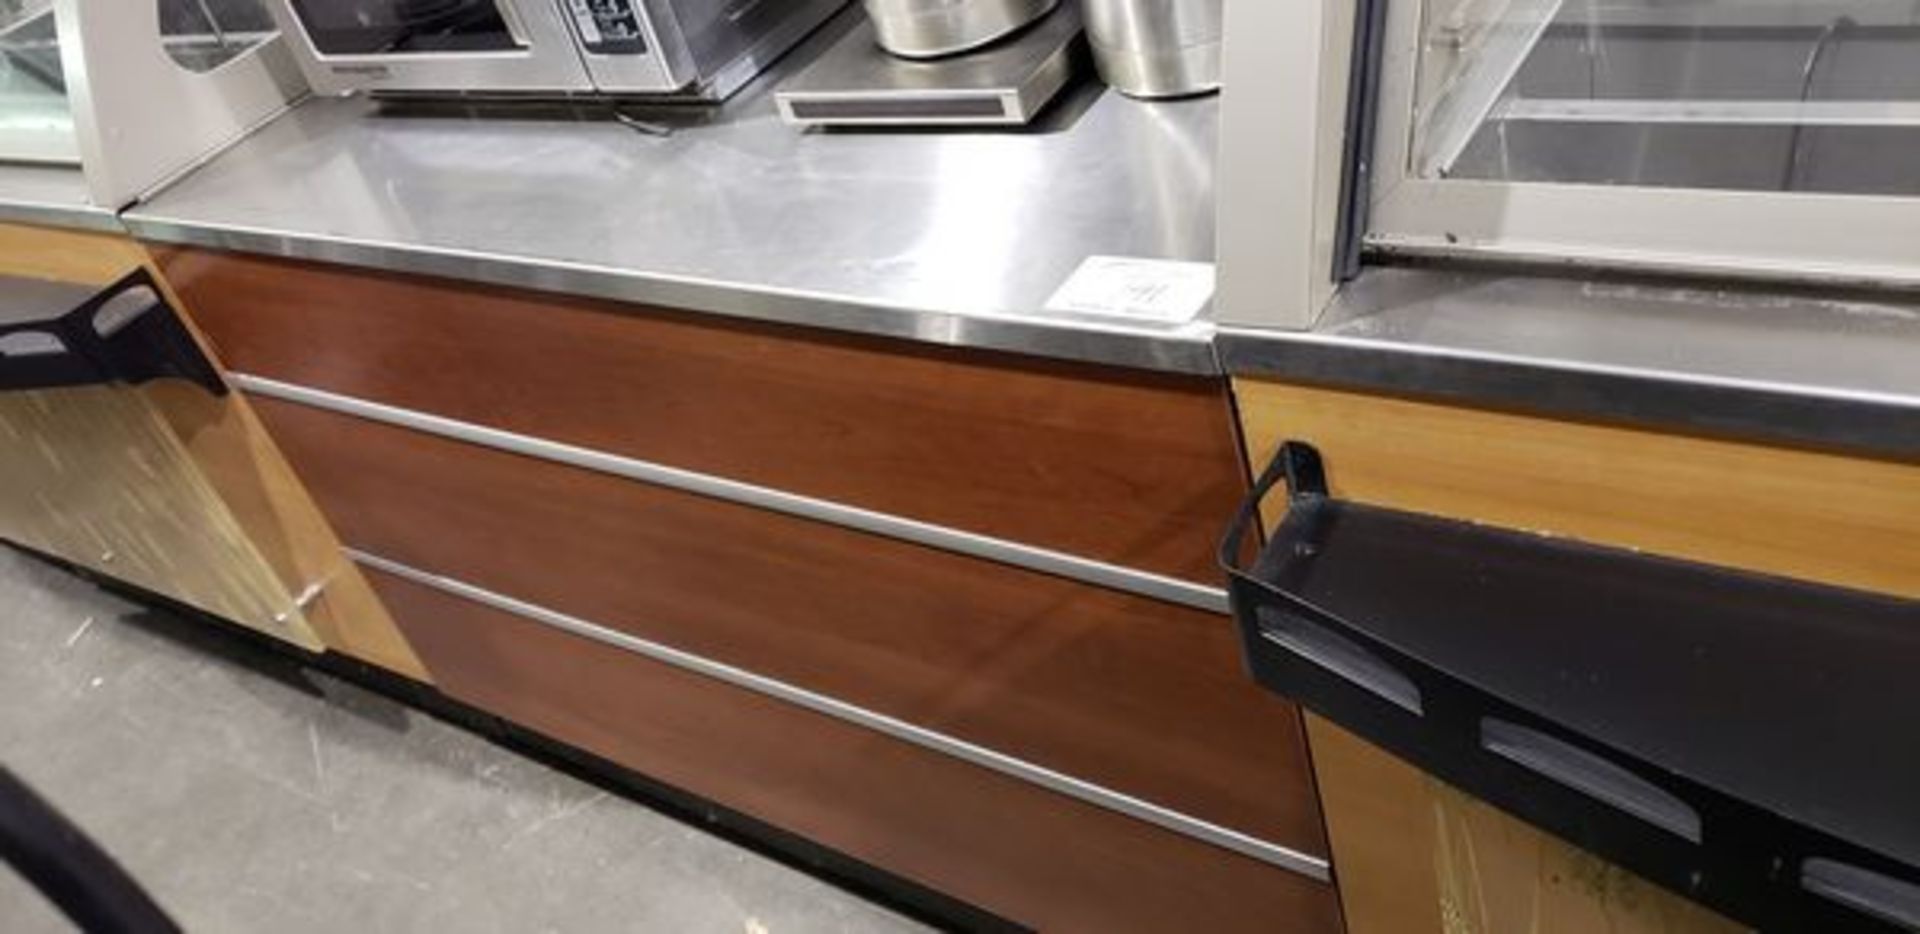 49" Stainless Steel Top Service Counter